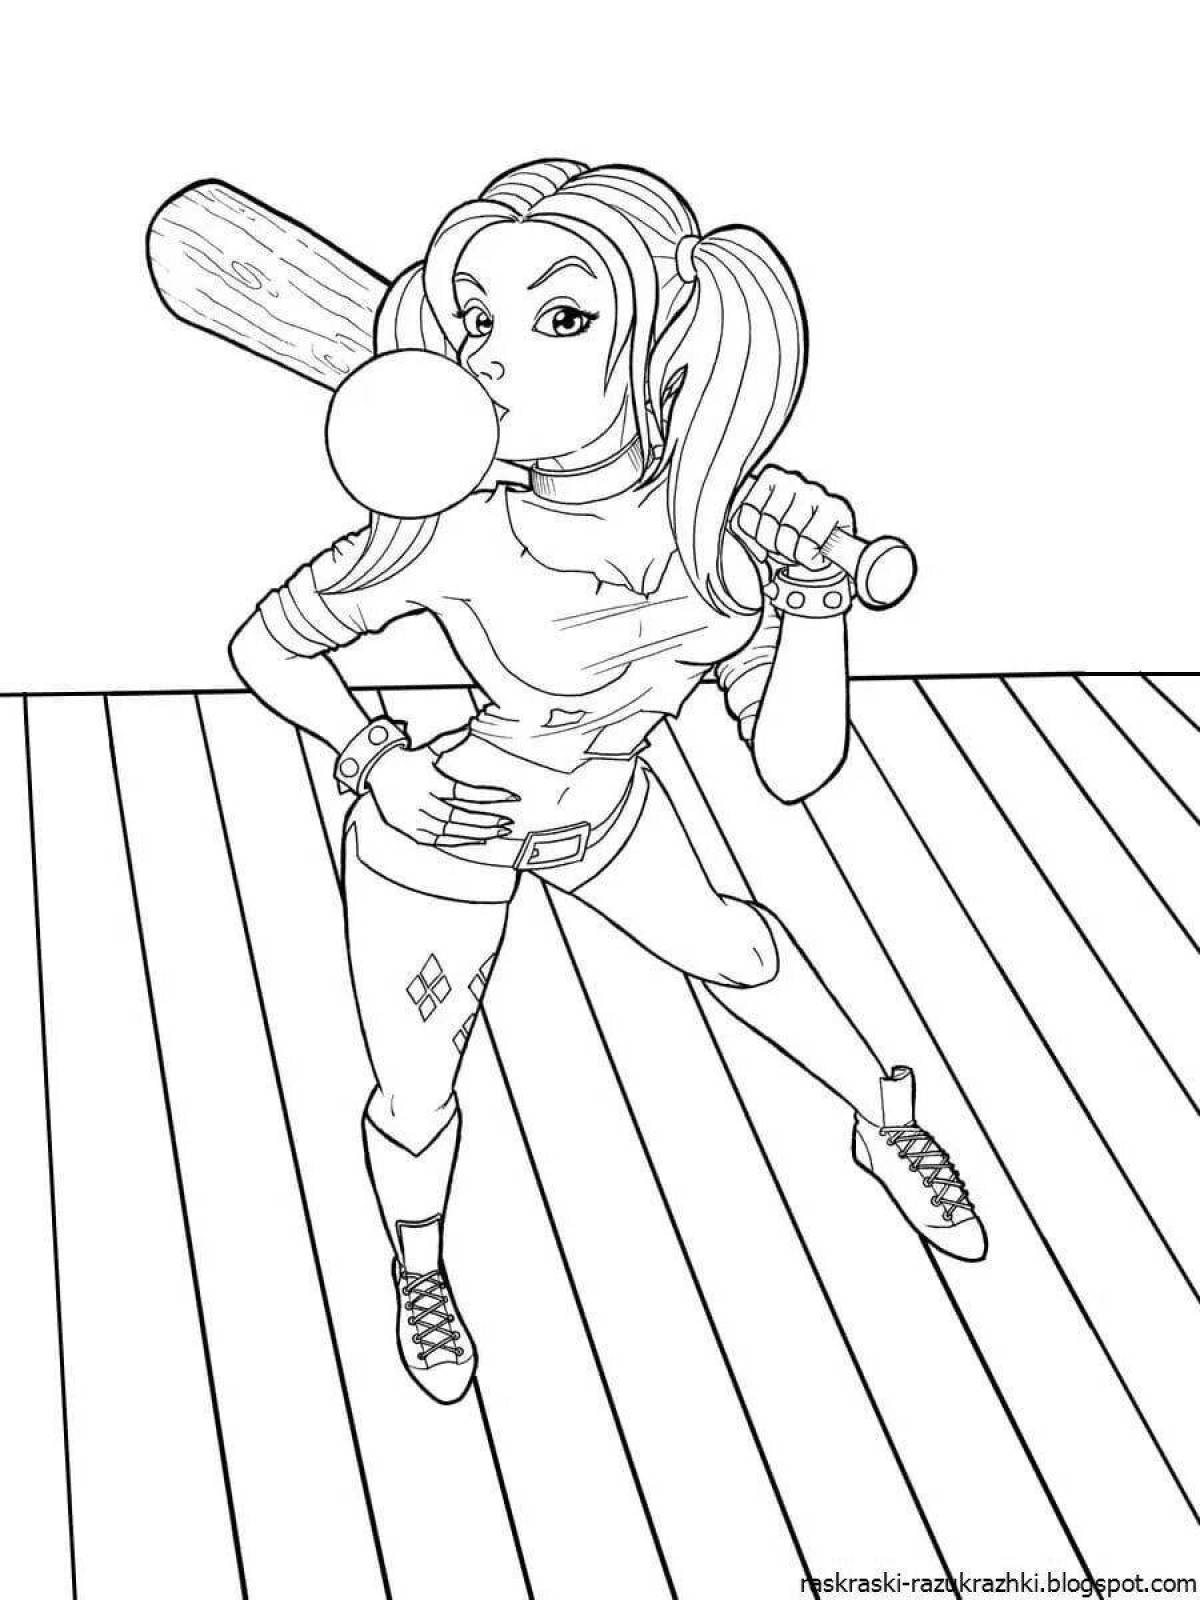 Awesome harley quinn coloring book for girls